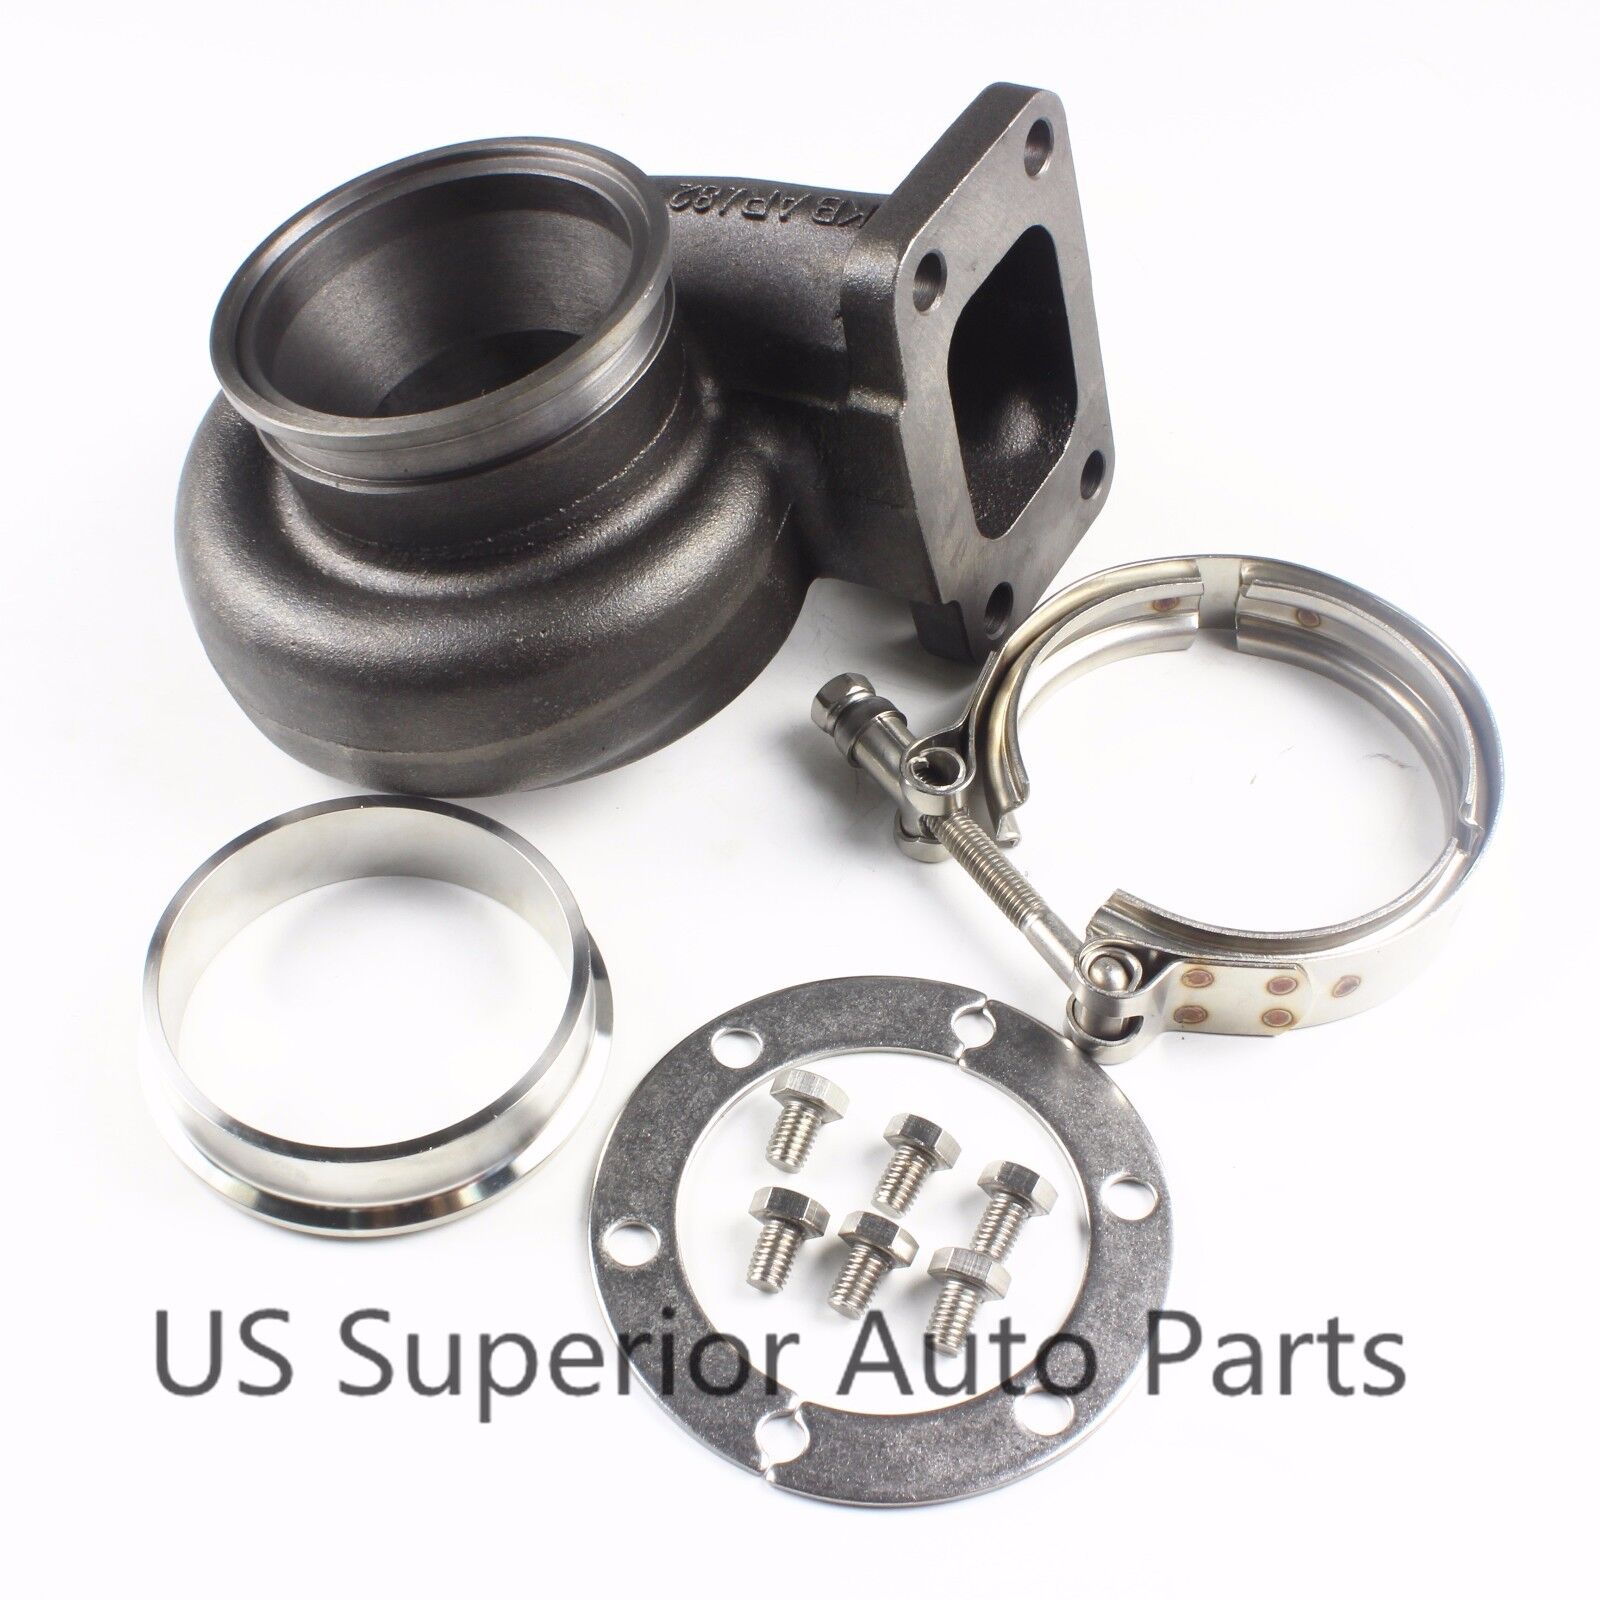 GT3071R GT3076R GT30 GTX30 Turbine Housing A/R .82 Vband Outlet 3'' Clamp Flange